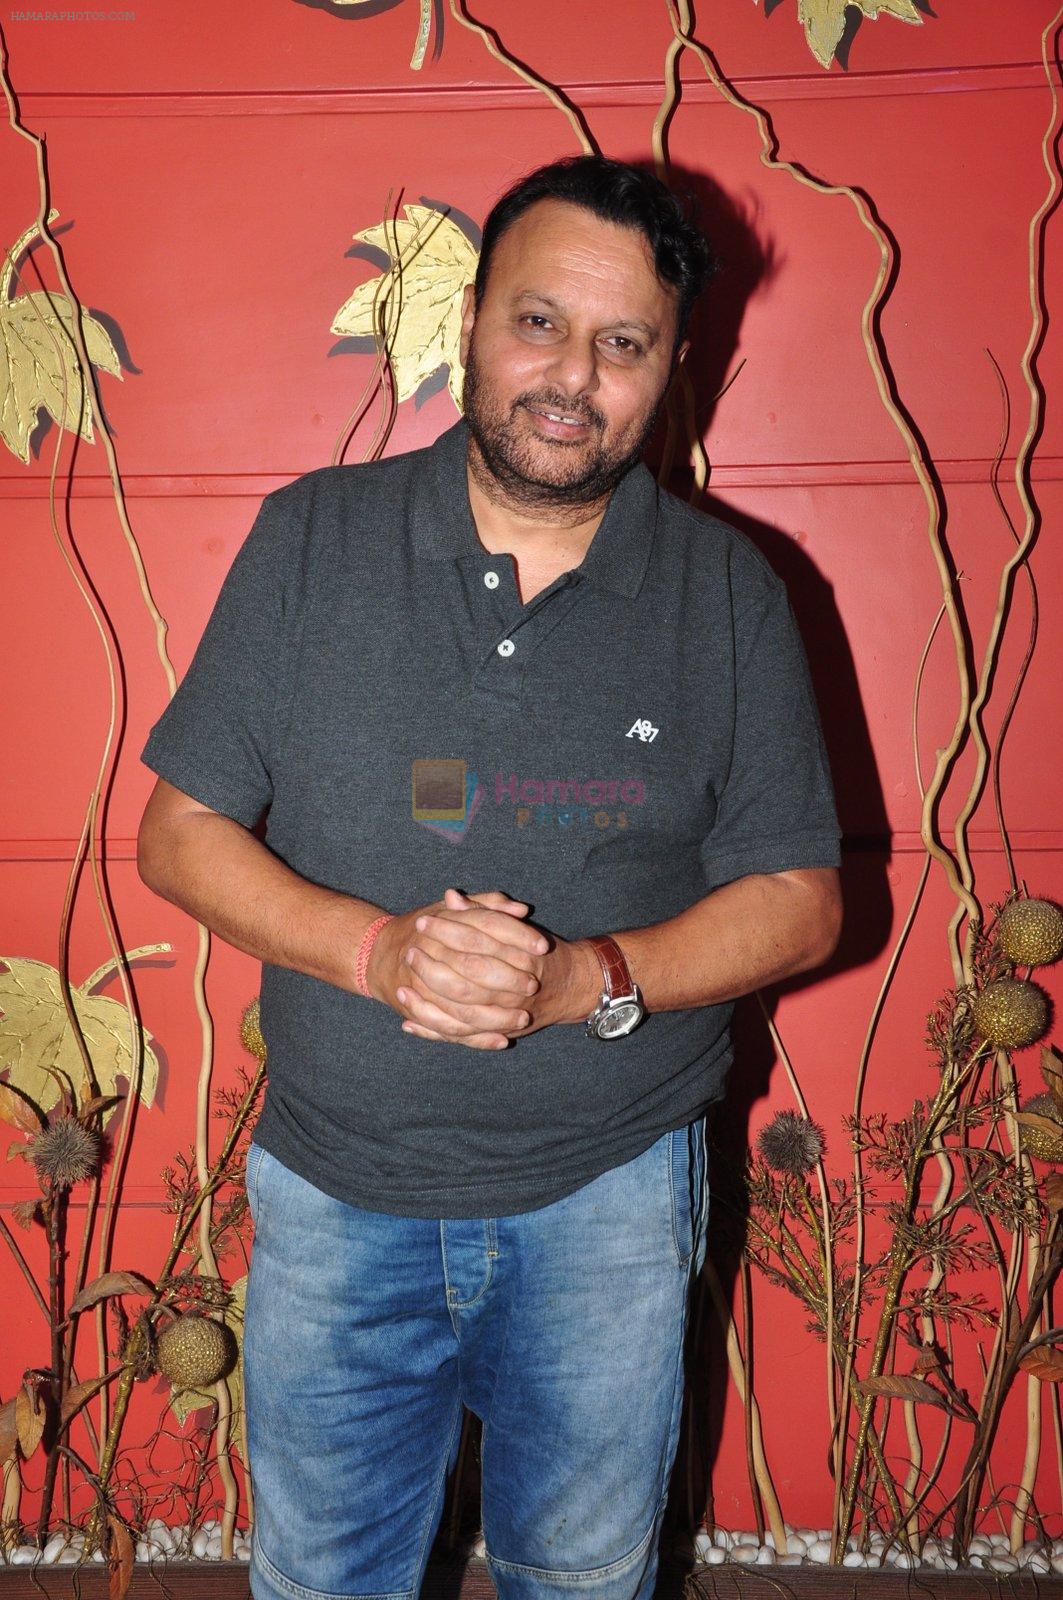 Anil Sharma at Leslie Lewis concert press meet in Mumbai on 13th July 2016